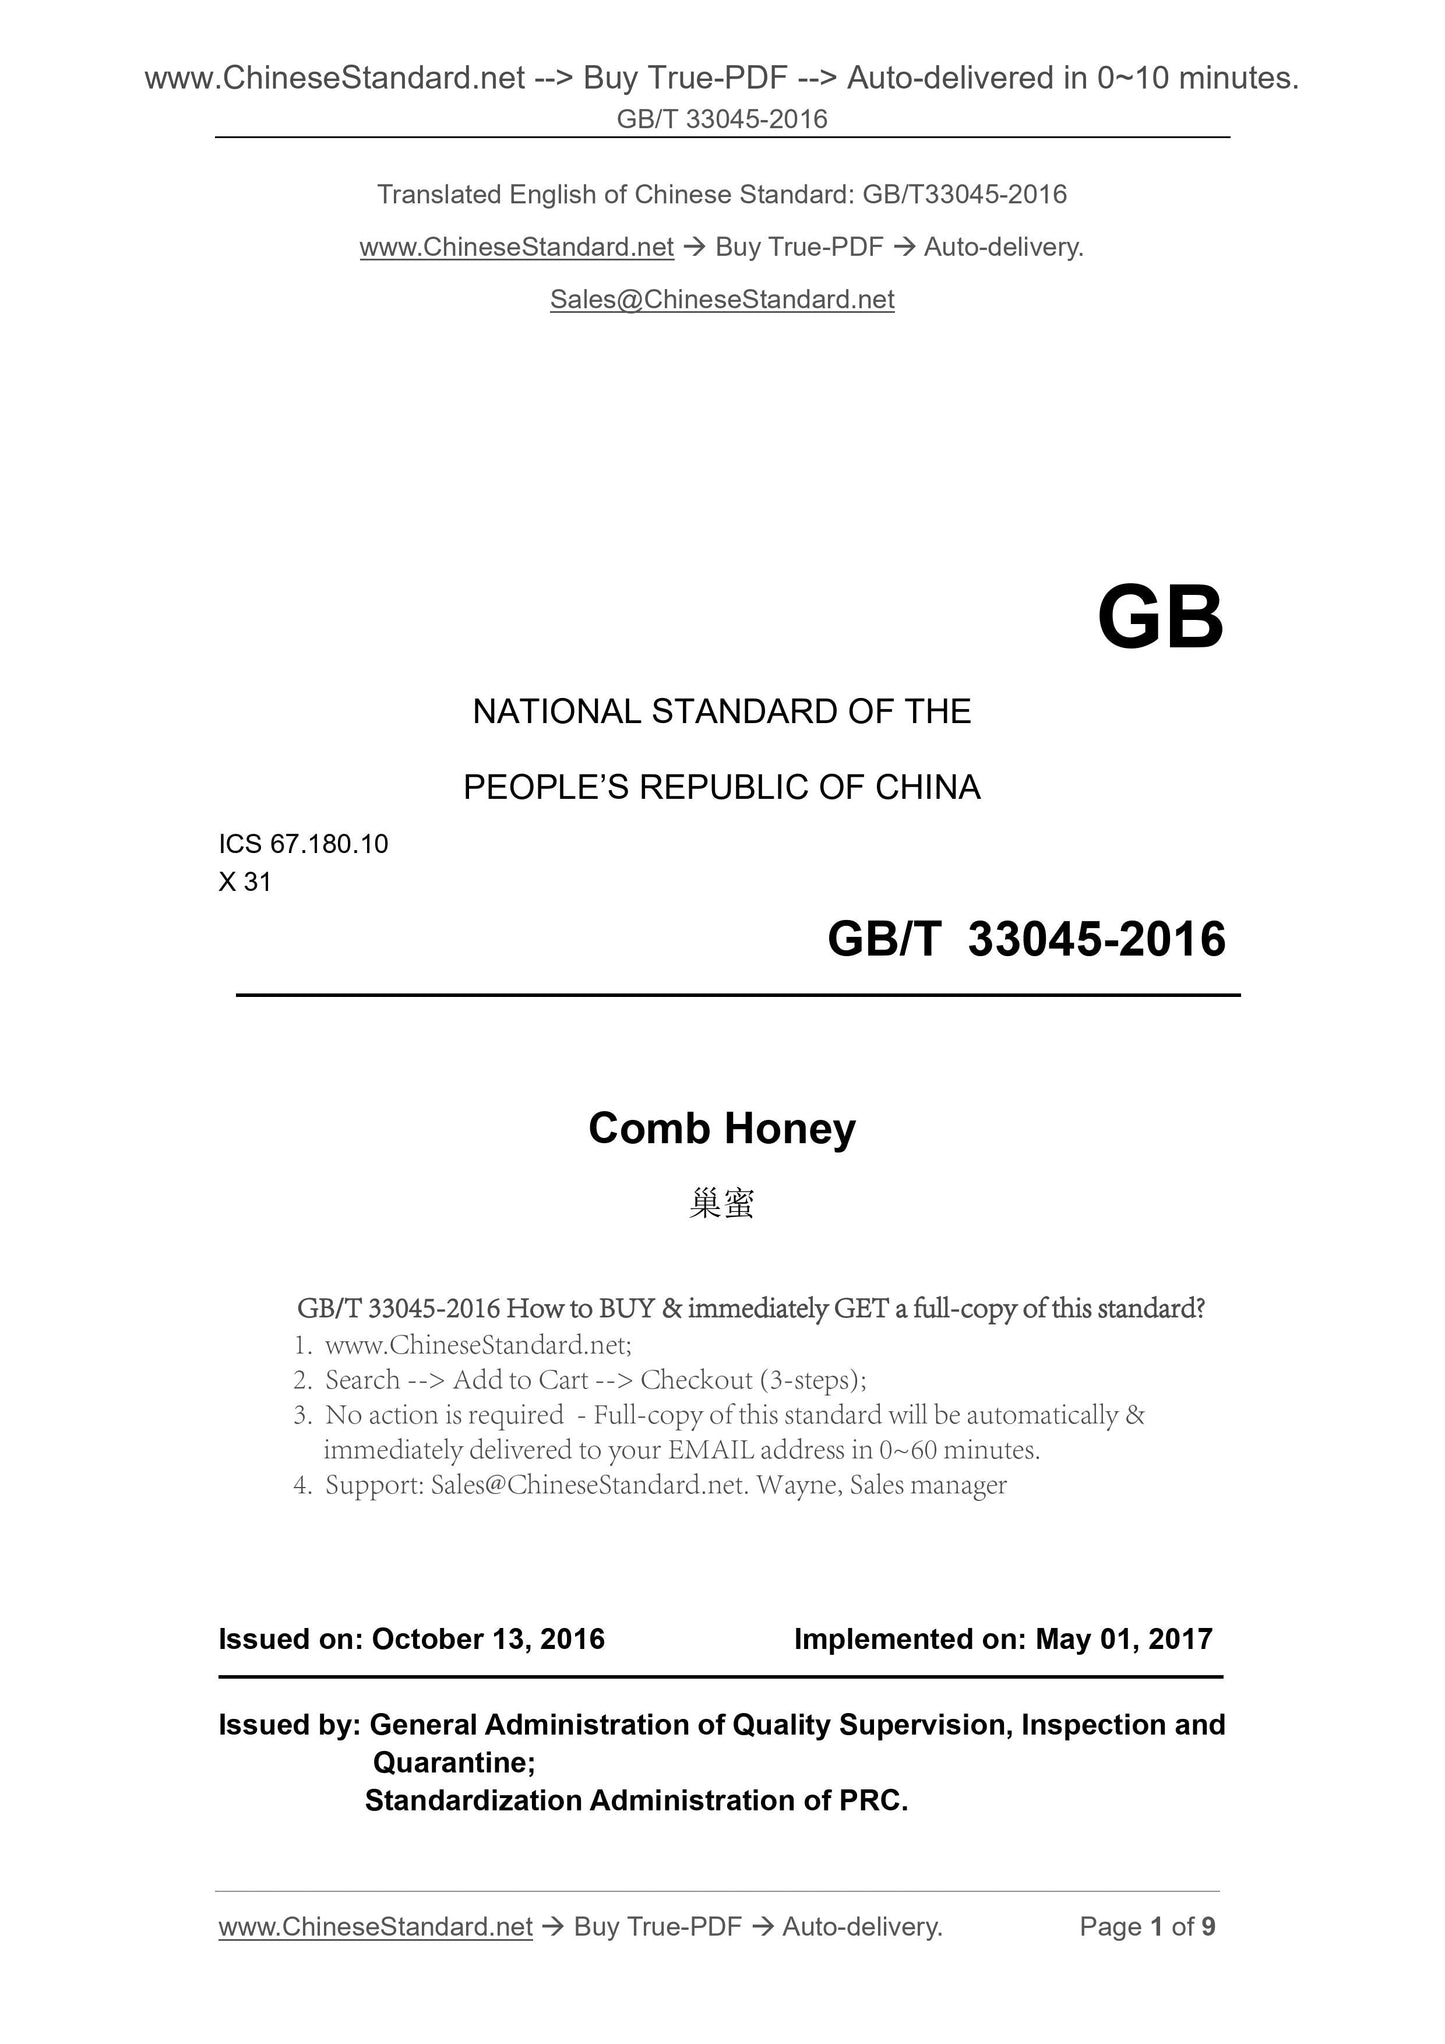 GB/T 33045-2016 Page 1